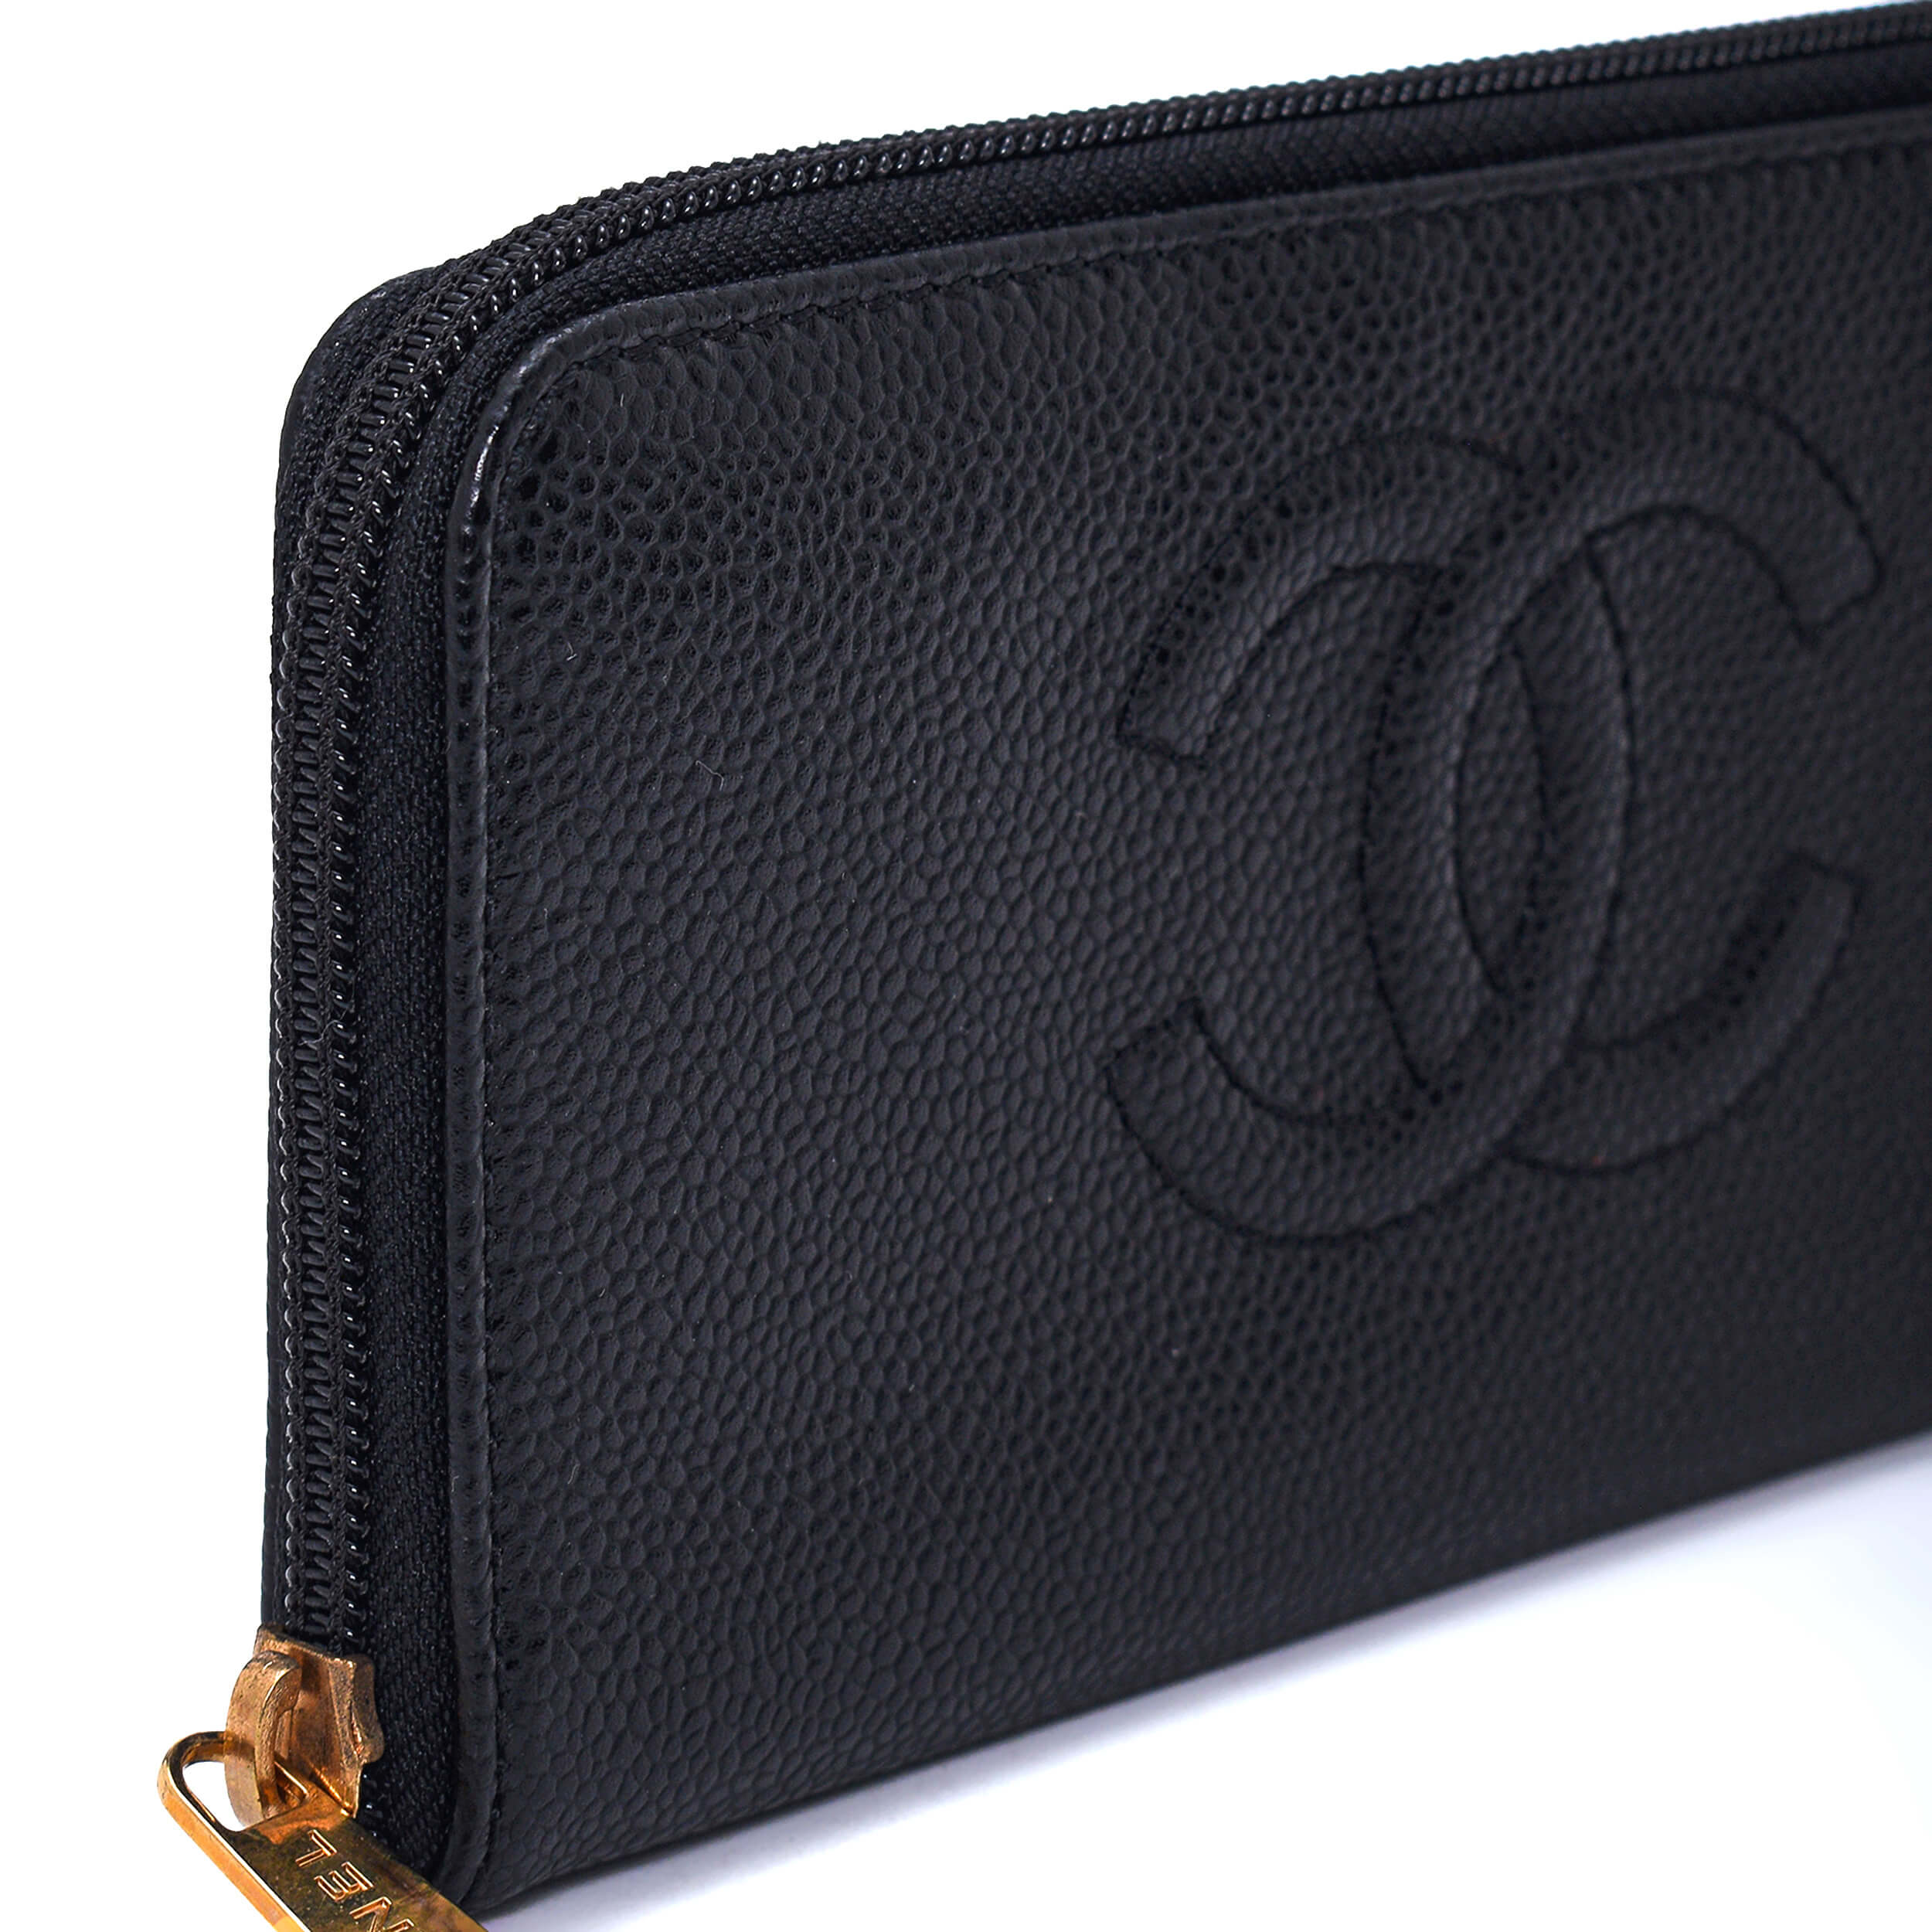 Chanel - Black Caviar Leather CC Timeless Zip Small Wallet